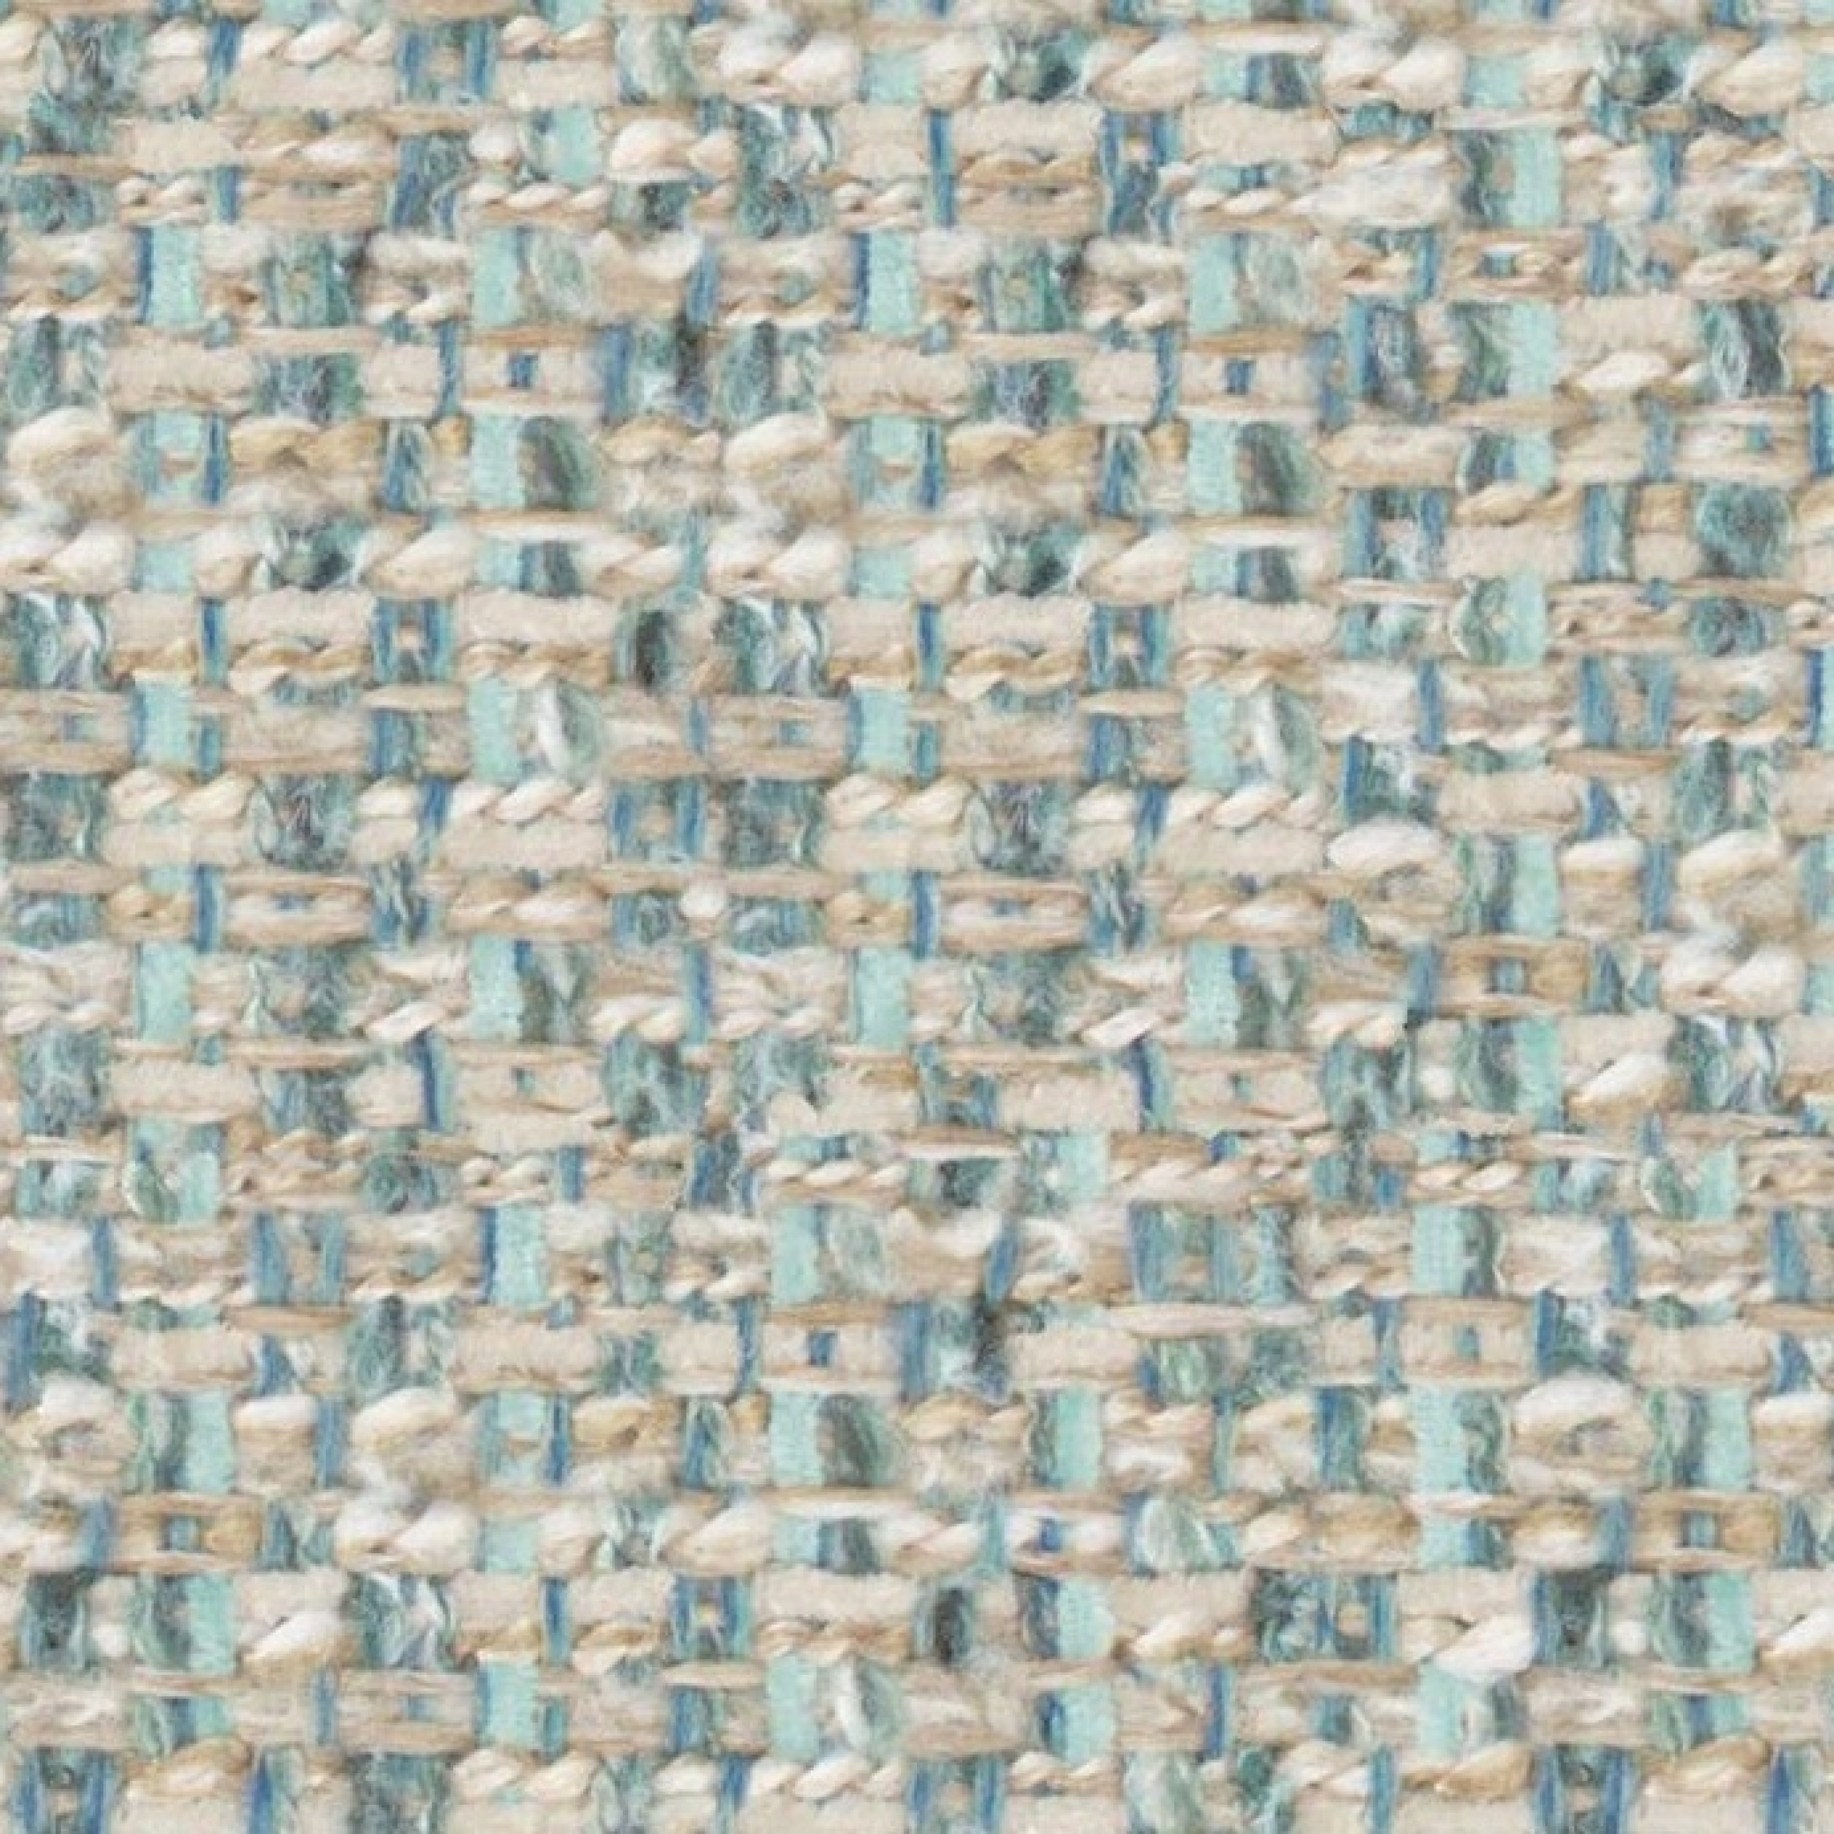 Robins Egg Blue Tweed Upholstery Fabric for Furniture Heavy Duty Taupe Blue  Crypton Fabric for Sofas Chairs and Benches SP 1610 